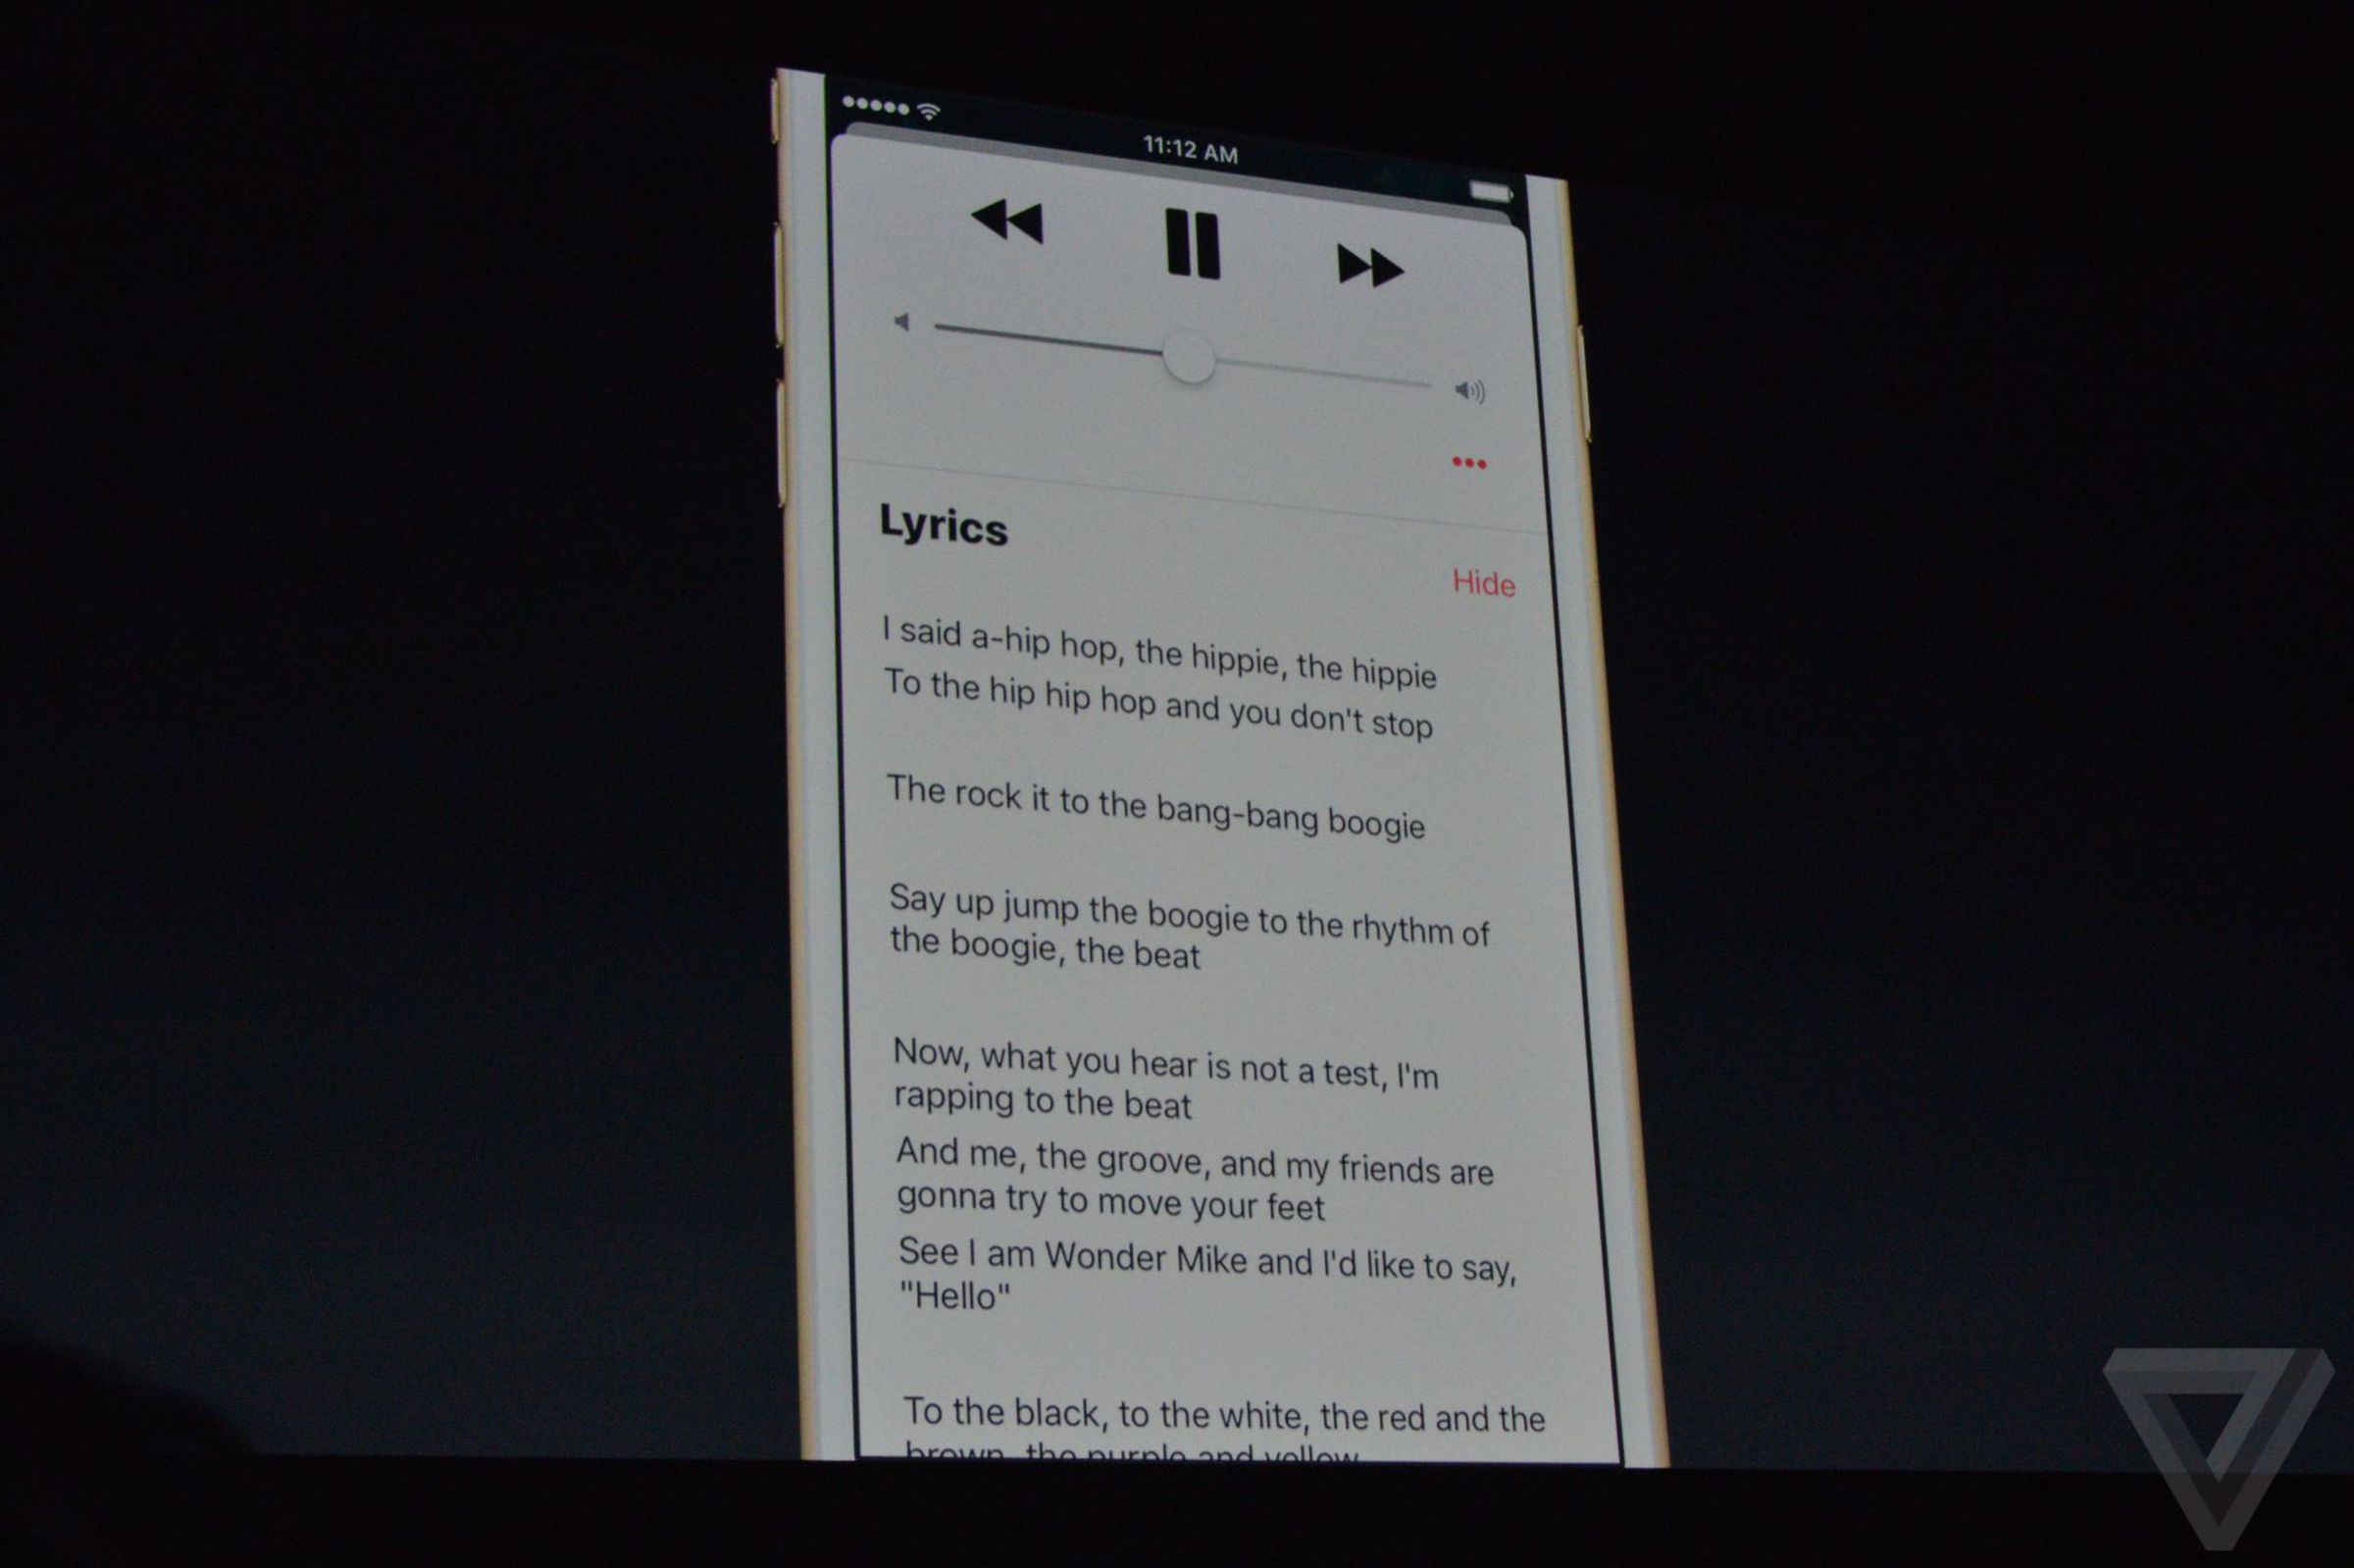 Apple Music at WWDC16 announcement photos